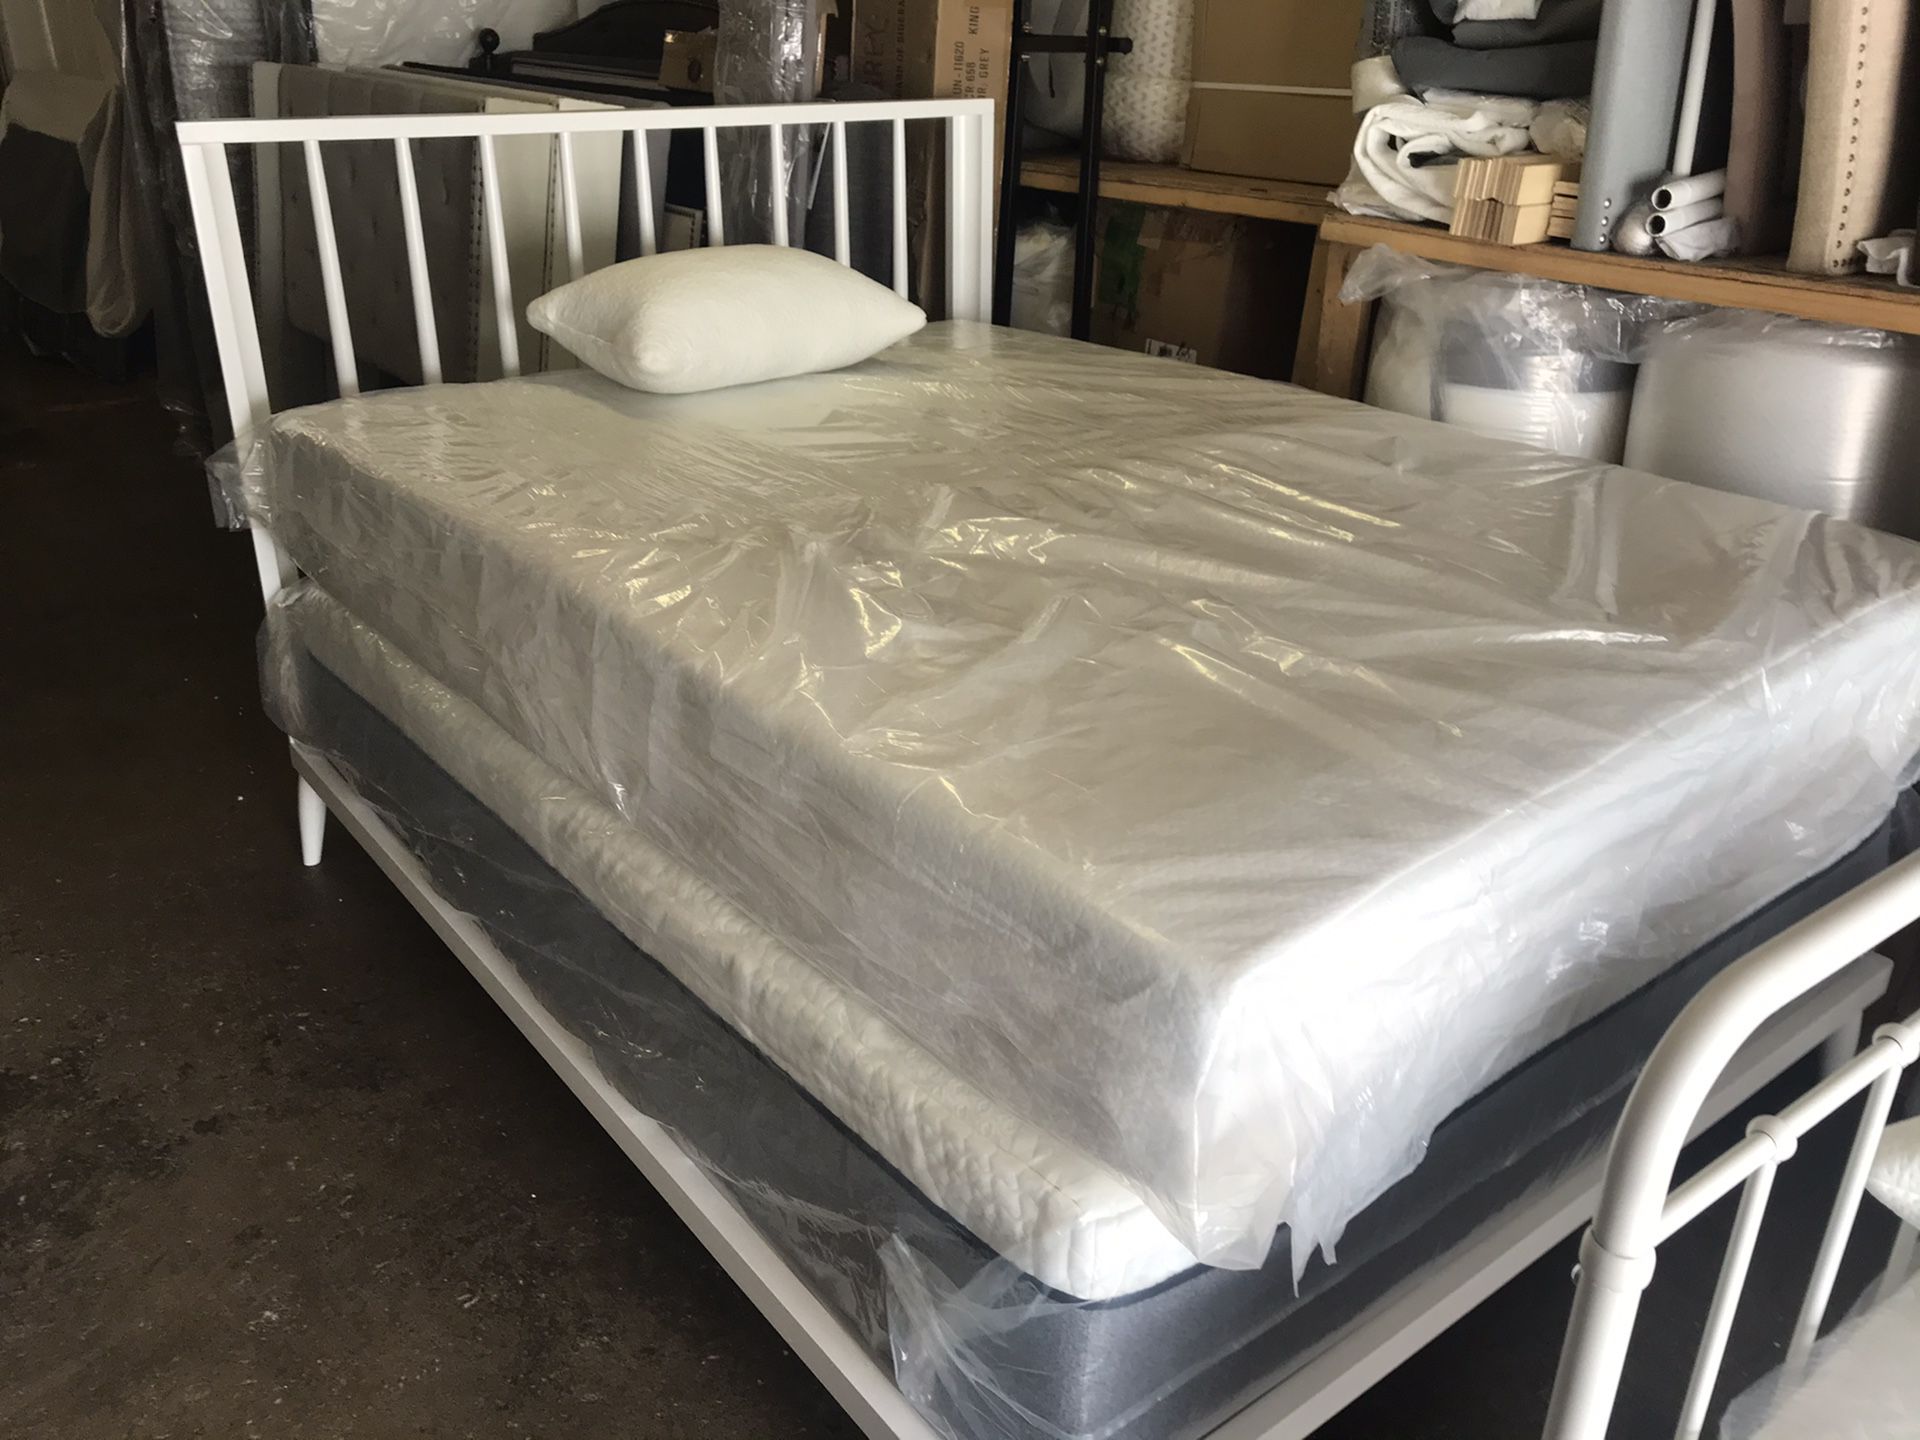 New Queen and KING size memory foam , cool gel and hybrid mattress sale starting at $140 up to $550